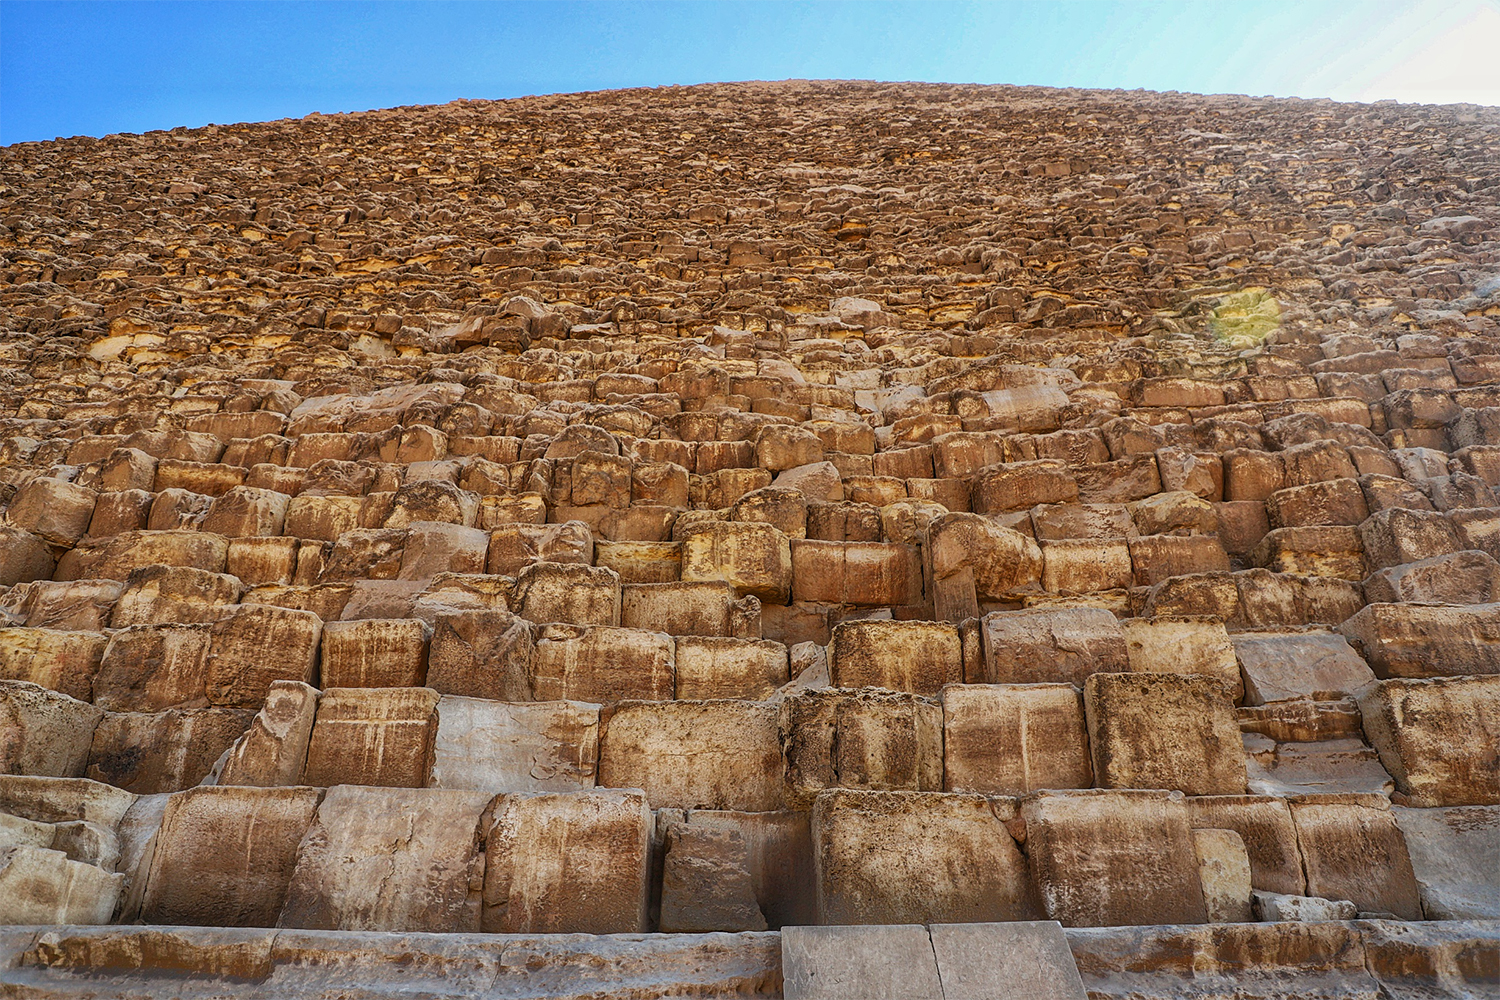 The view from the bottom of a Giza pyramid looking up the blocks to the top